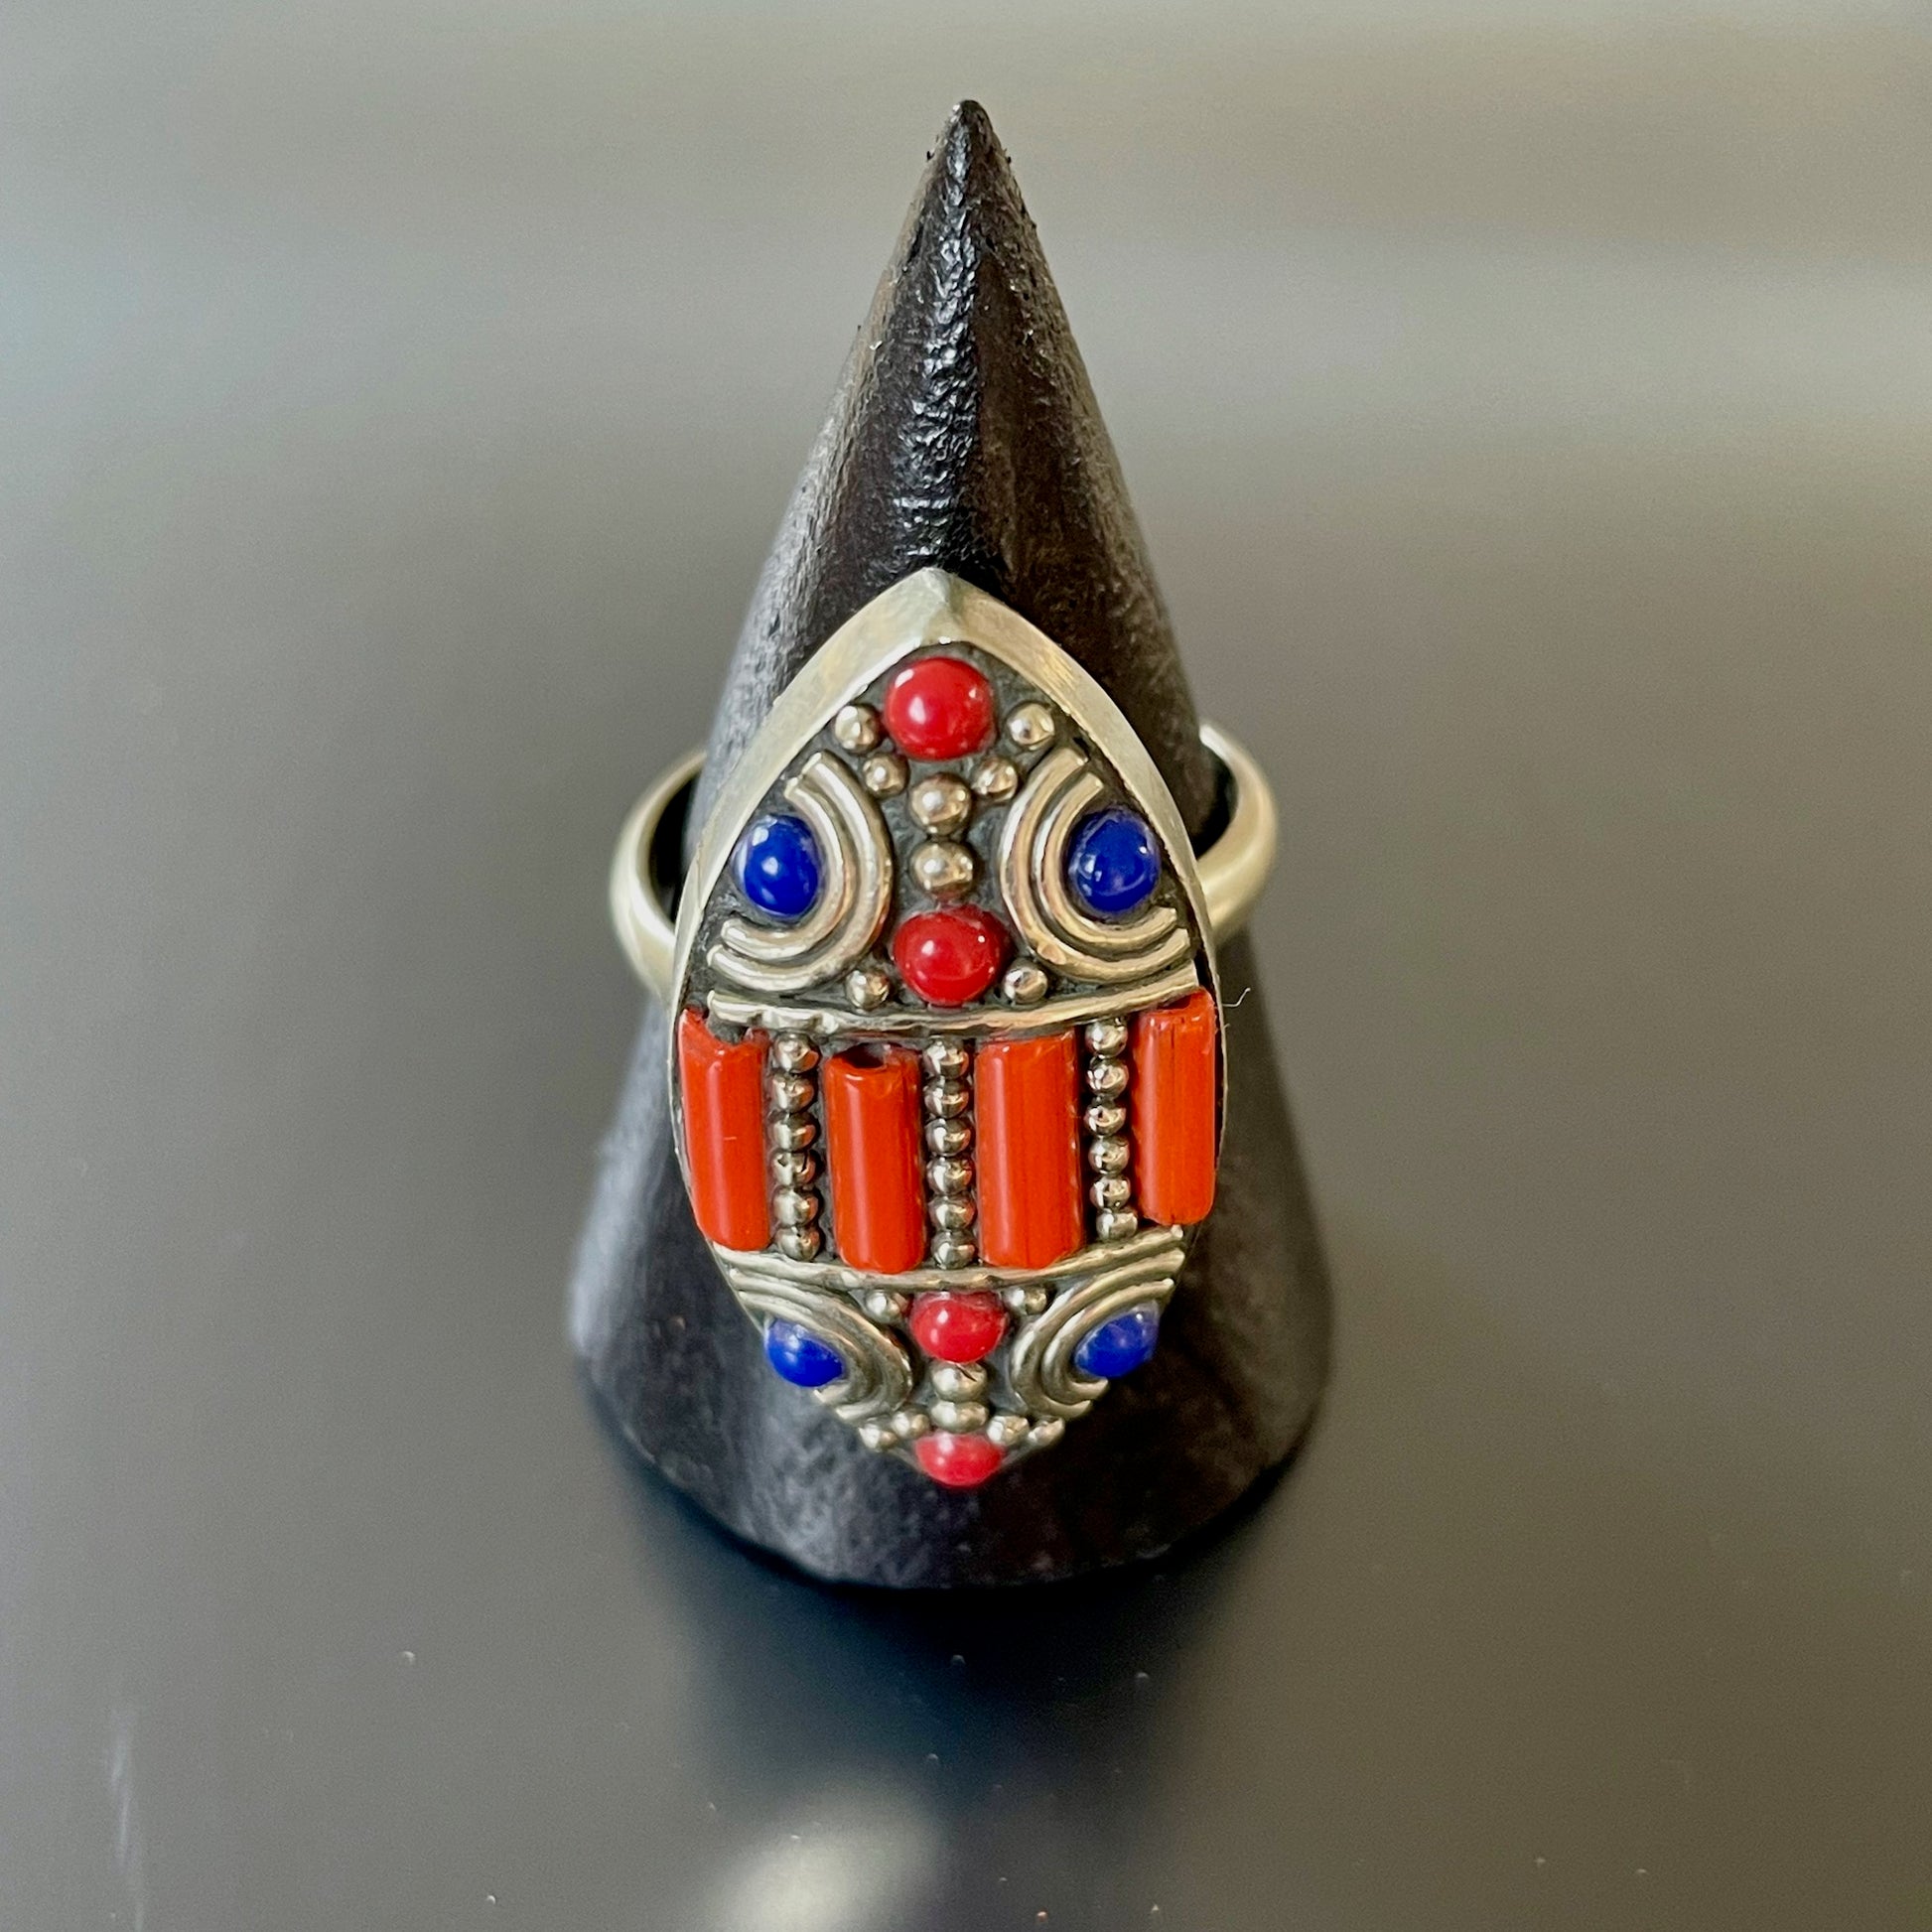 Berber Shield Ring with Red & Blue Stones 2